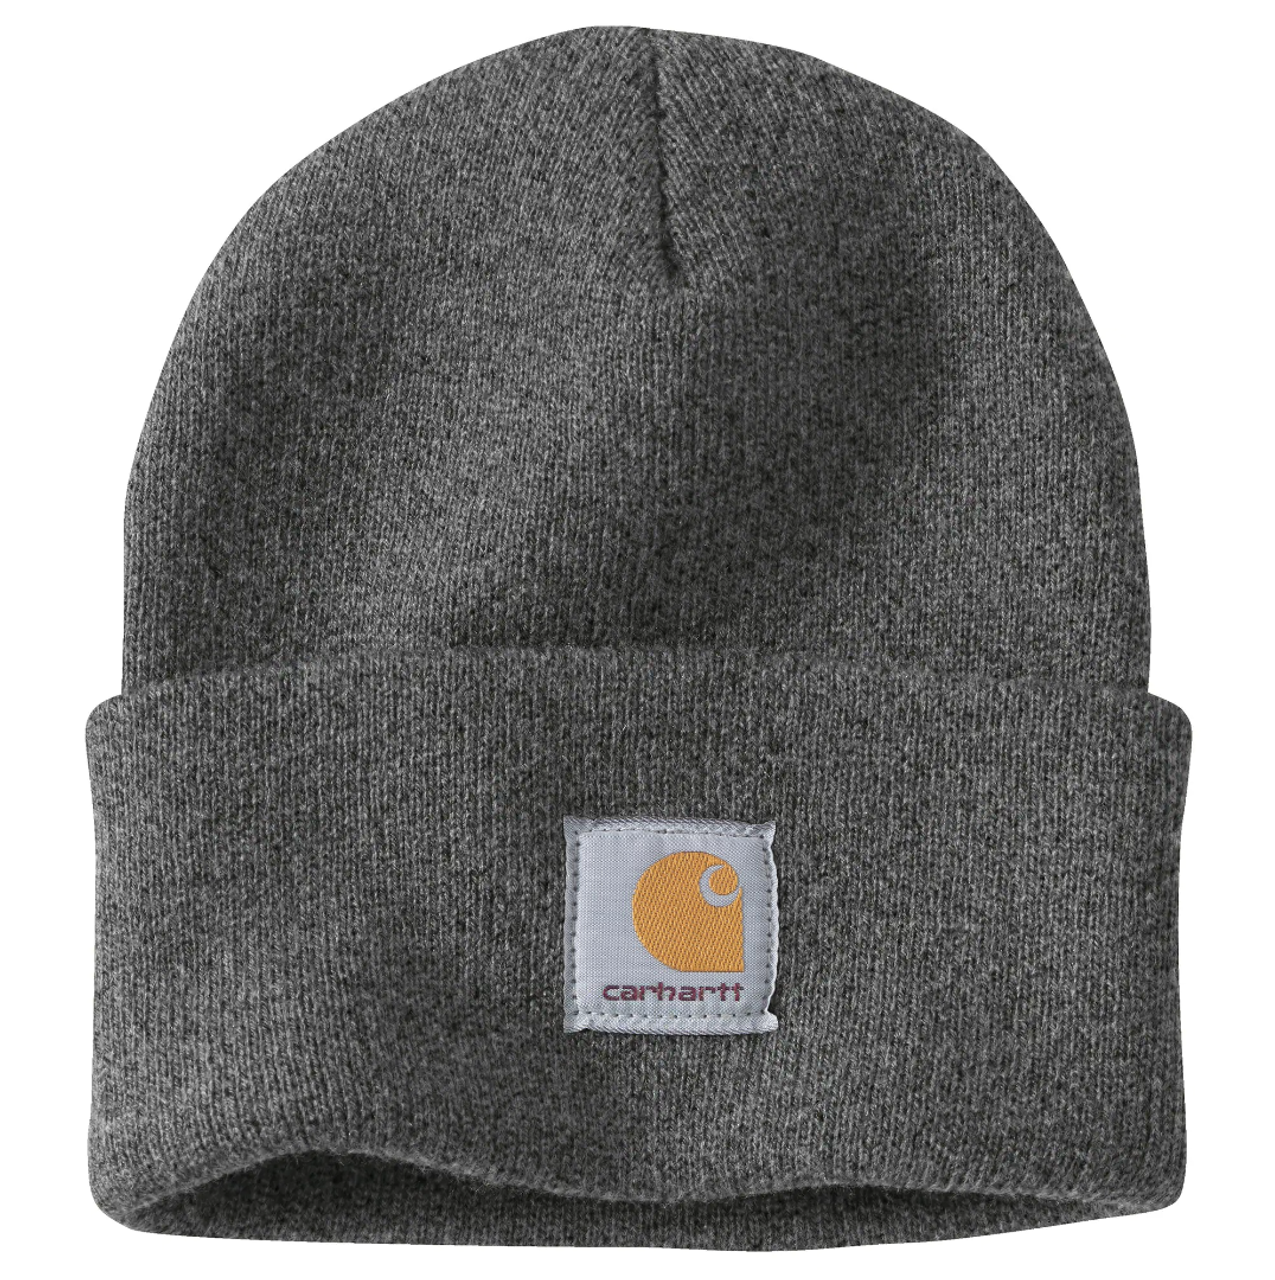 Carhartt - Knit Cuffed Beanie - Coal Heather - 100% Acrylic Rib Knit hat with Fold-up Cuff and Carhartt Patch - Model No A18